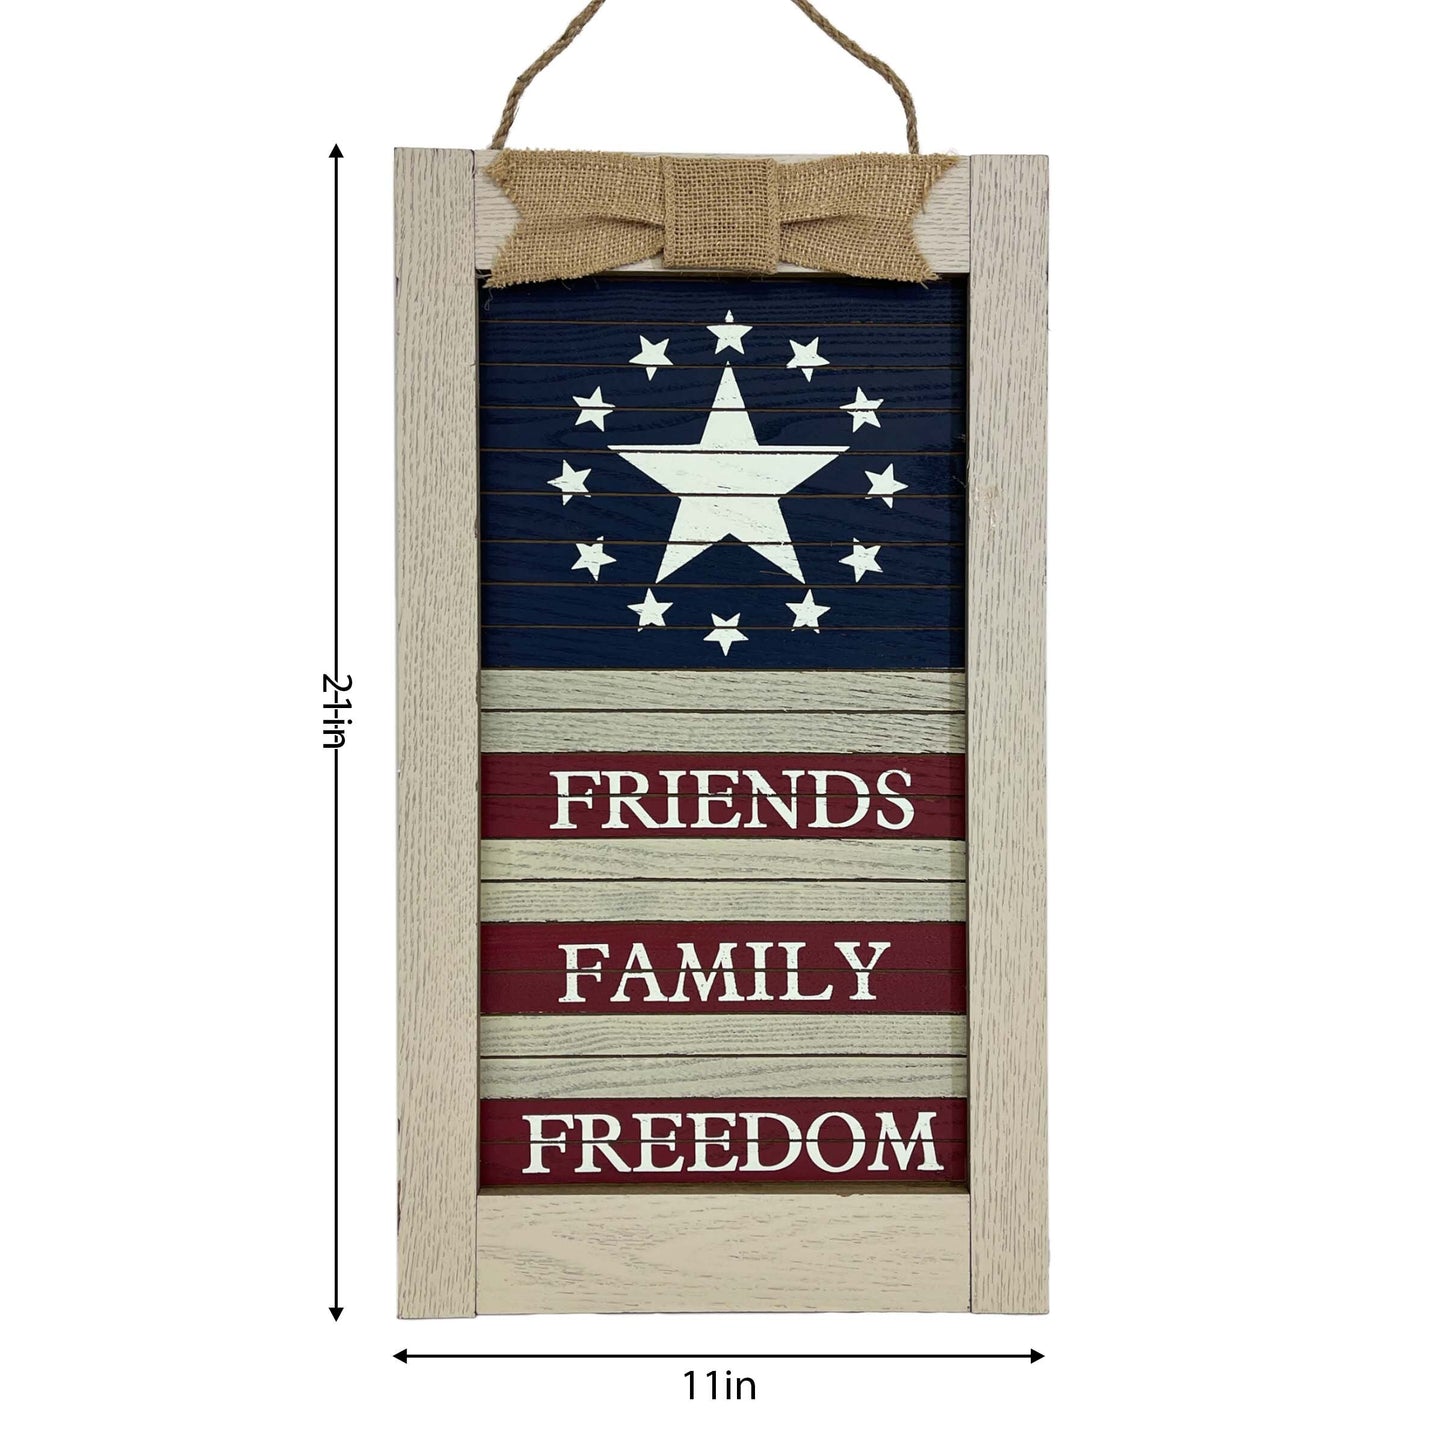 Friends Family Freedom Hanging Sign, Patriotic Party Decoration, Independence Day Wooden Plaque, 4th of July Decorations for Home